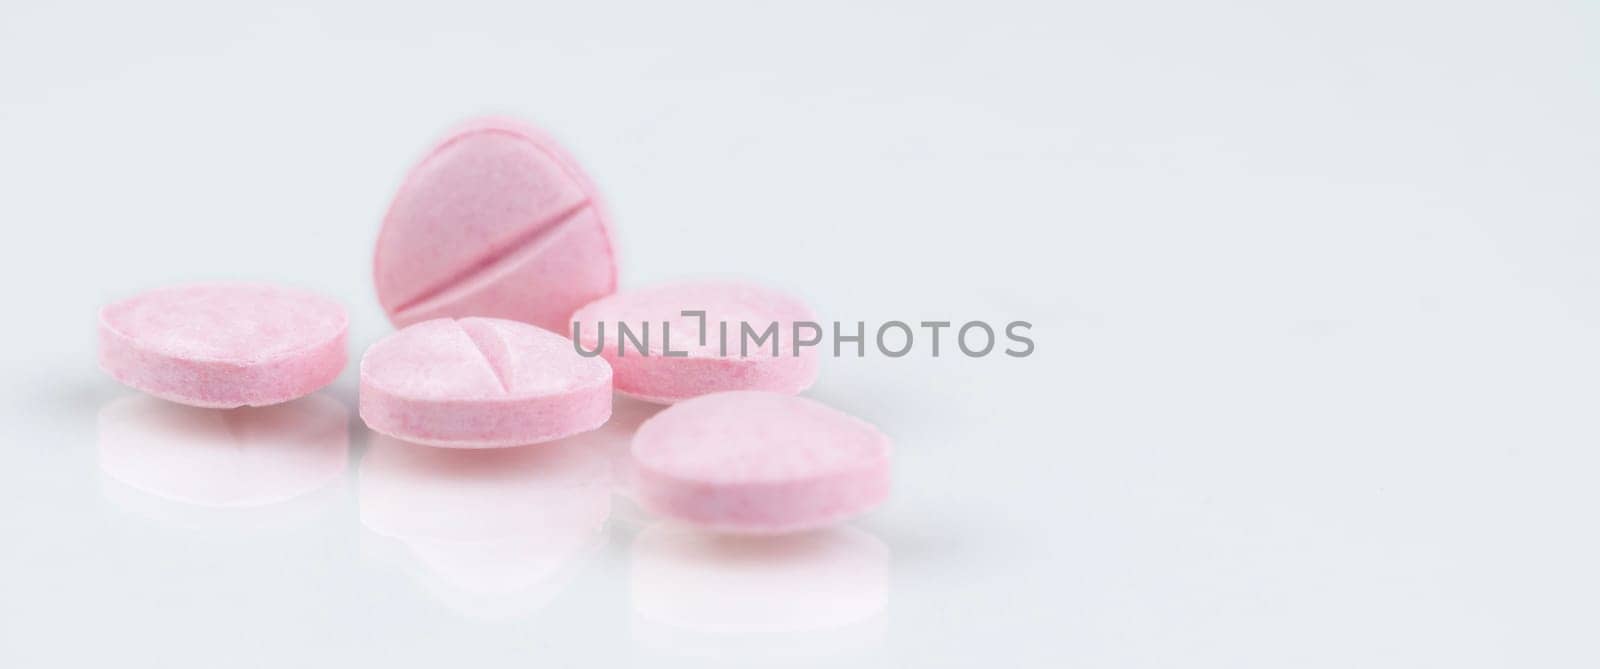 Pink tablets pills on white background. Health and medical care concept. Pharmacy banner. Prescription drug. Pharmaceutical industry. Medical center banner. Vitamins, minerals and supplements concept. by Fahroni